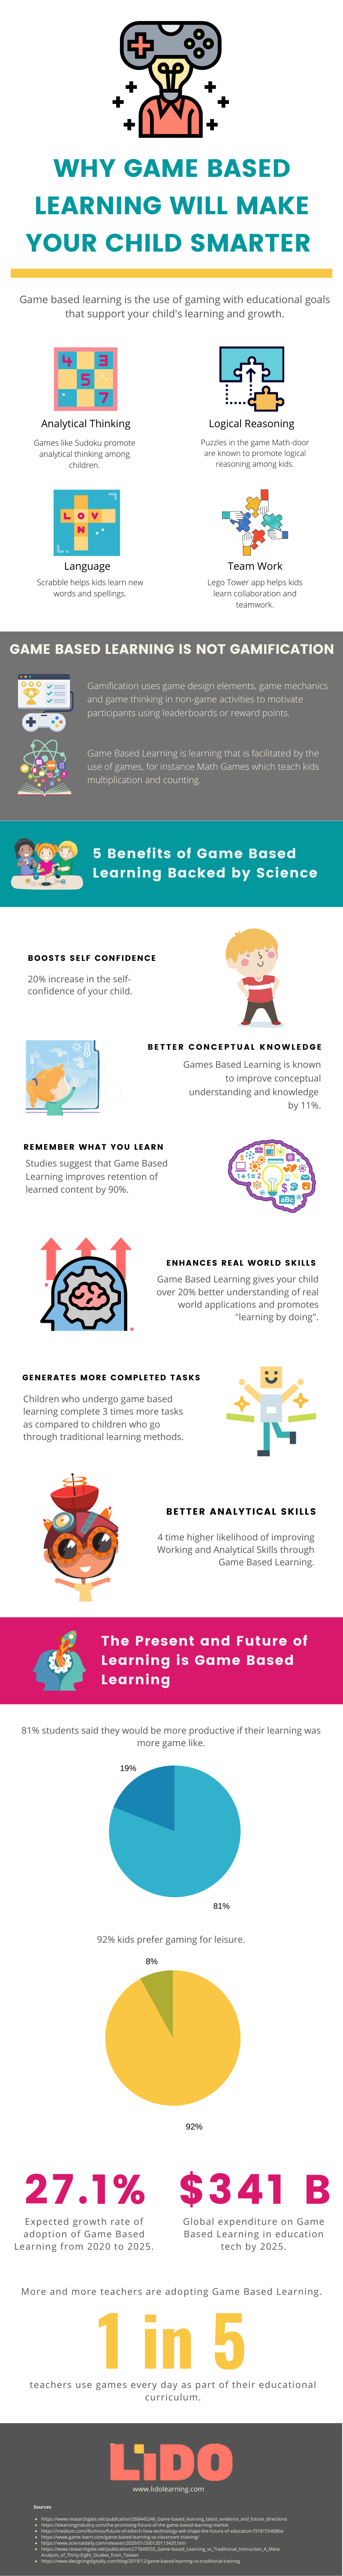 why-game-based-learning-will-make-your-child-smarter